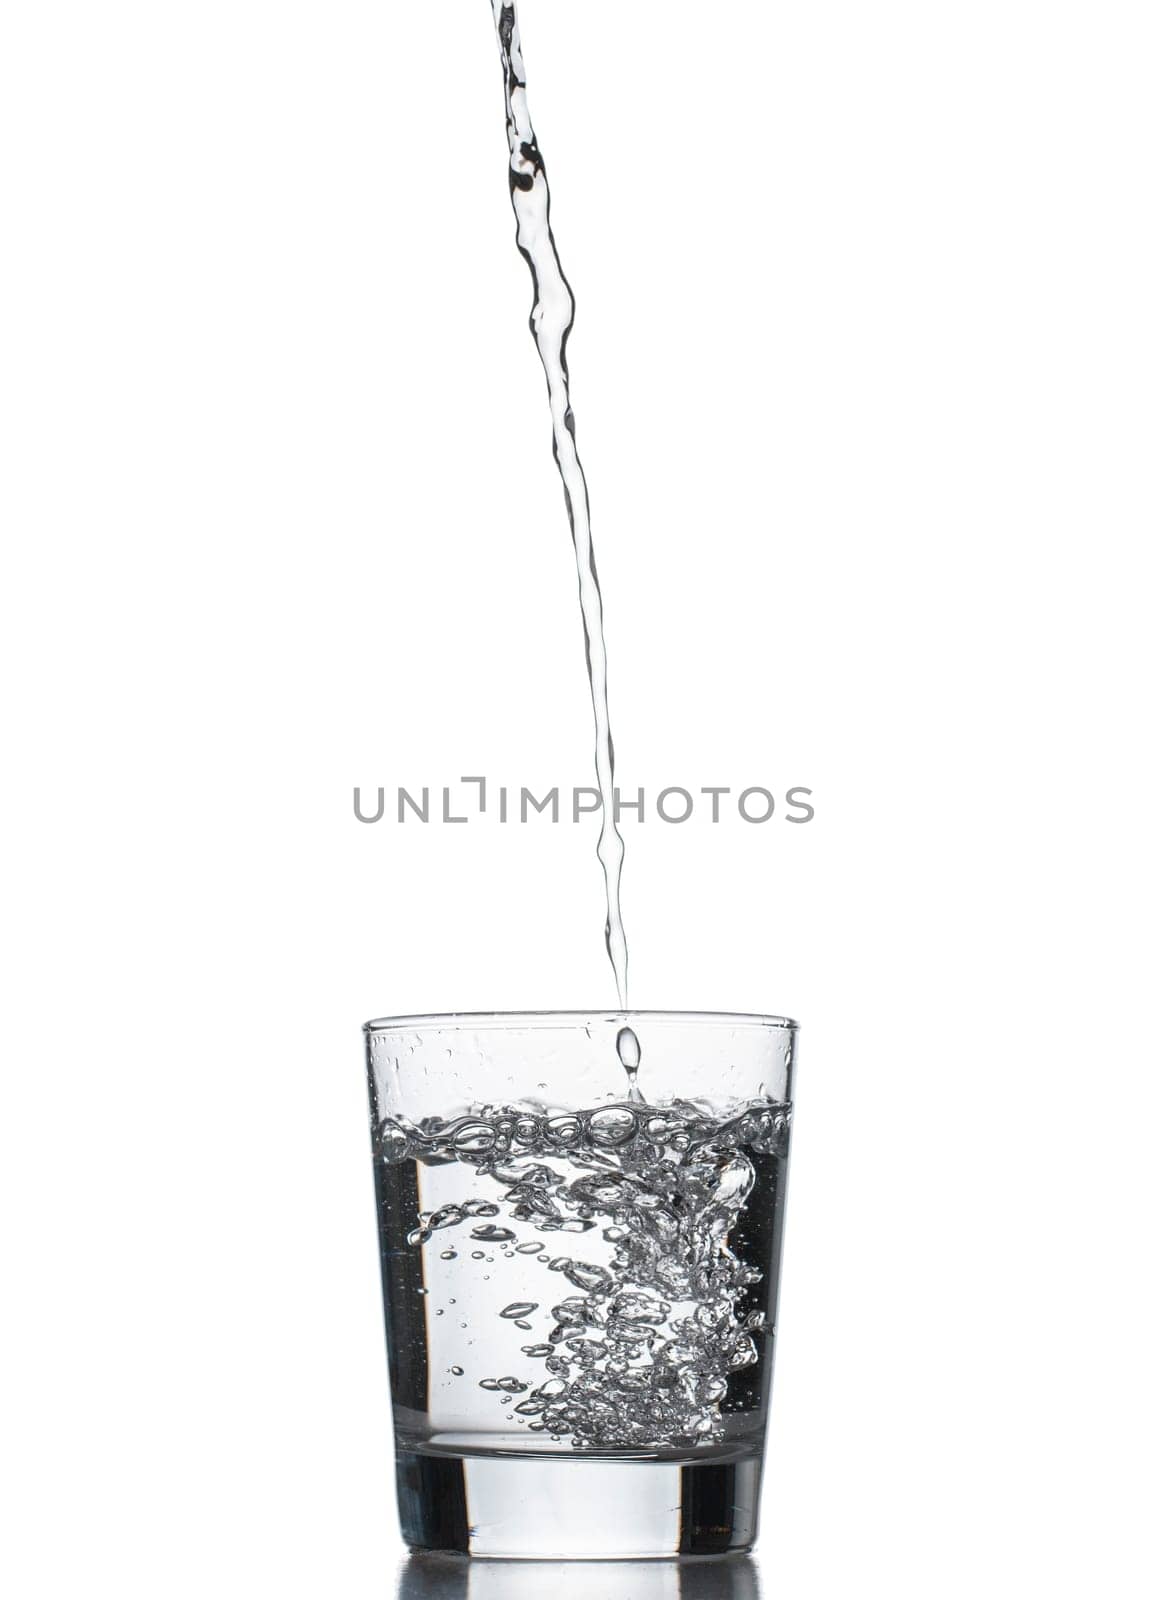 water splashing from glass isolated on white background by fascinadora